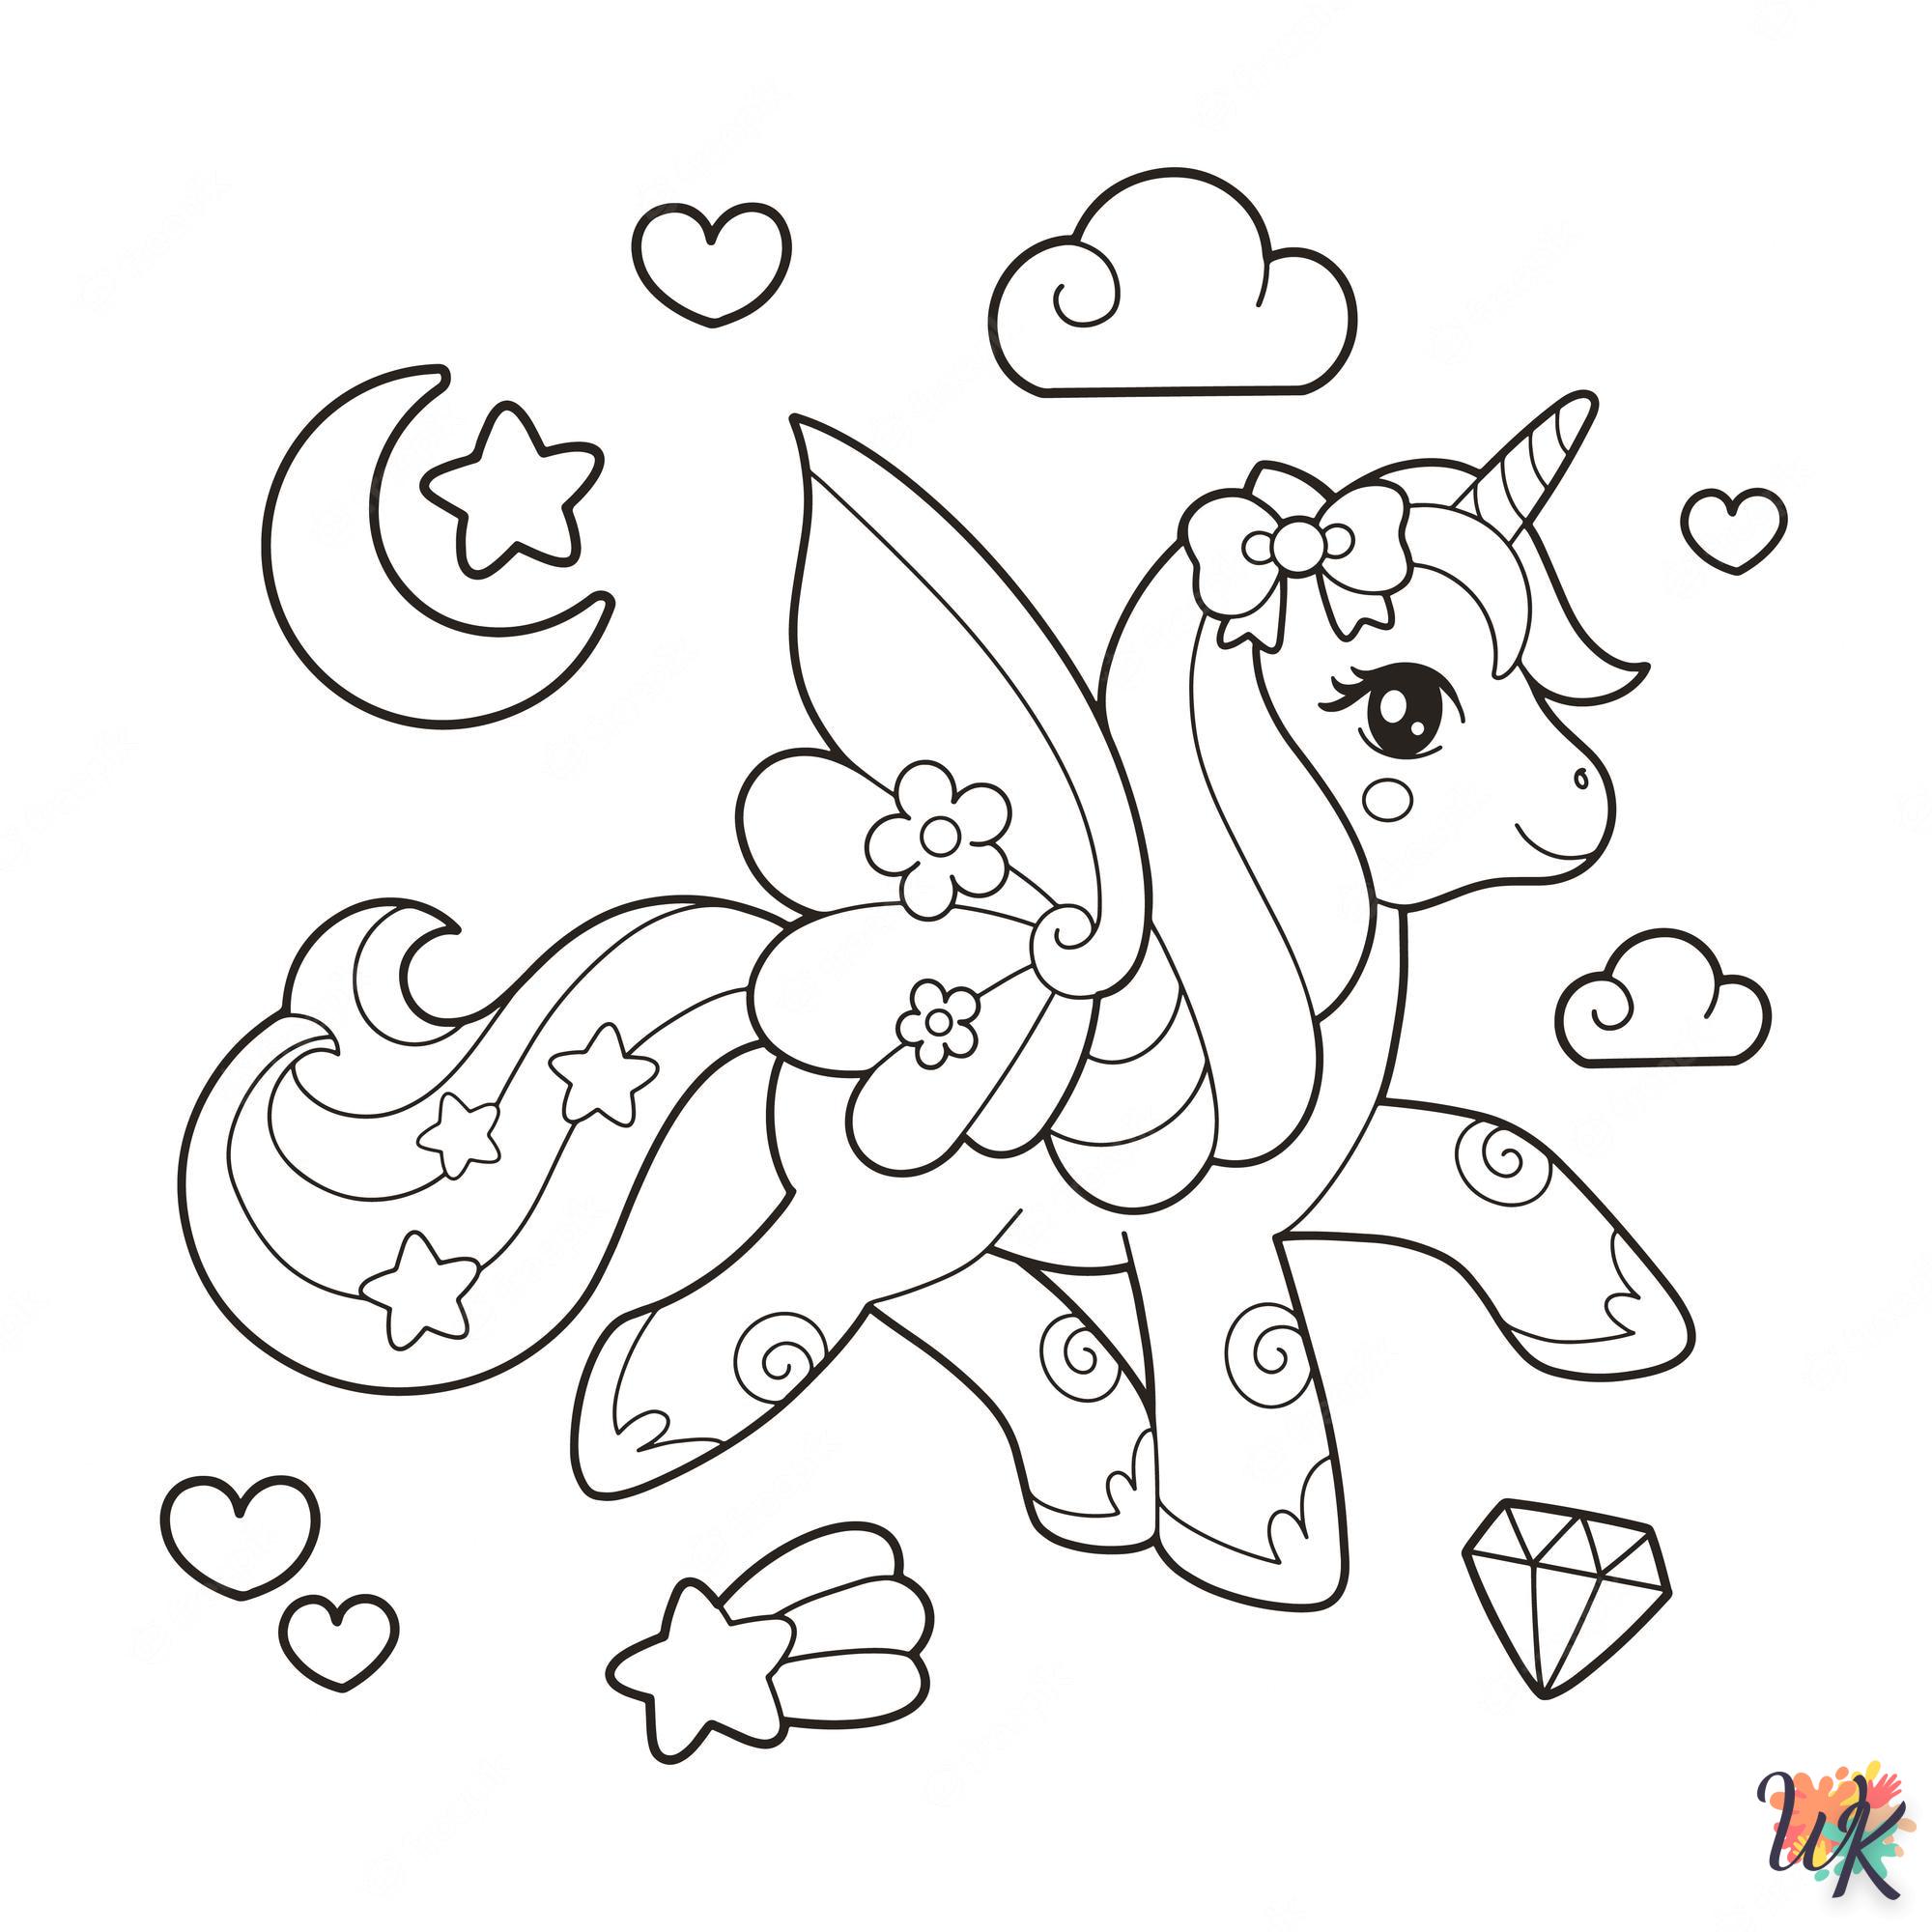 Unicorn coloring pages grinch